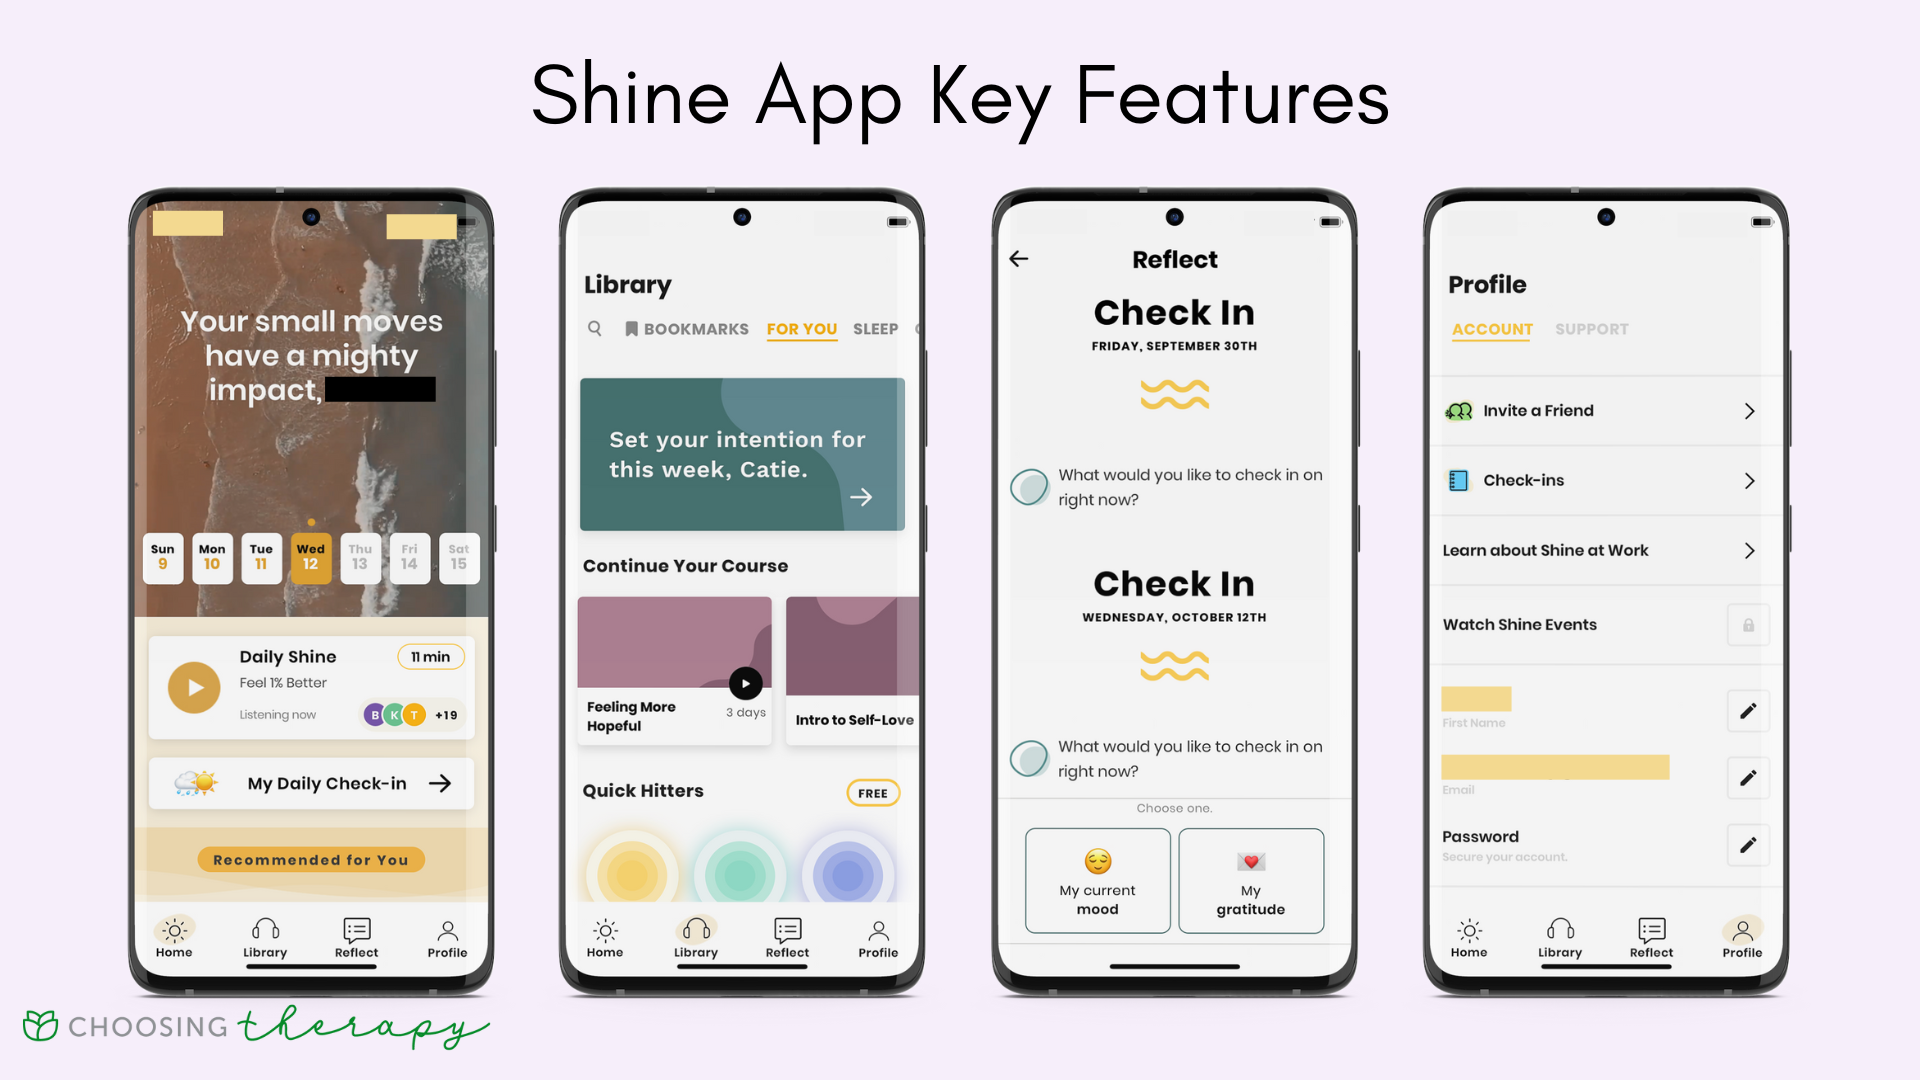 Shine App - Image of the key features in the Shine app, the home screen, the meditation library, daily mood check-in, and your profile